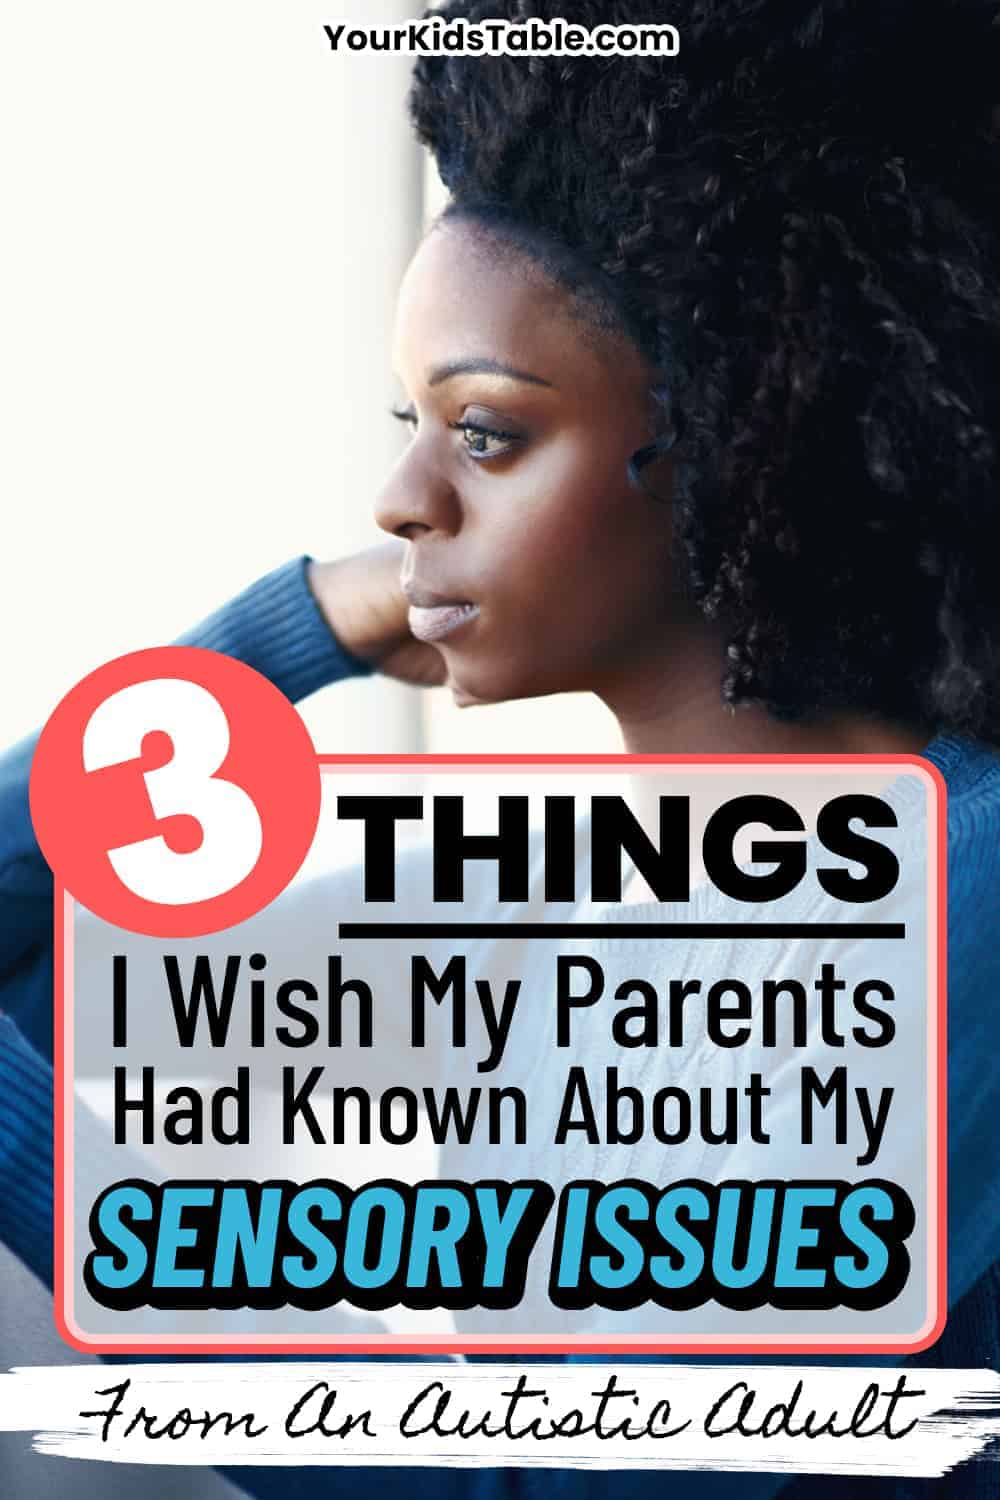 An Autistic adult, that was once an autistic girl, offers 3 things she wishes her parents knew on how to support kids with sensory issues as they grow and change.